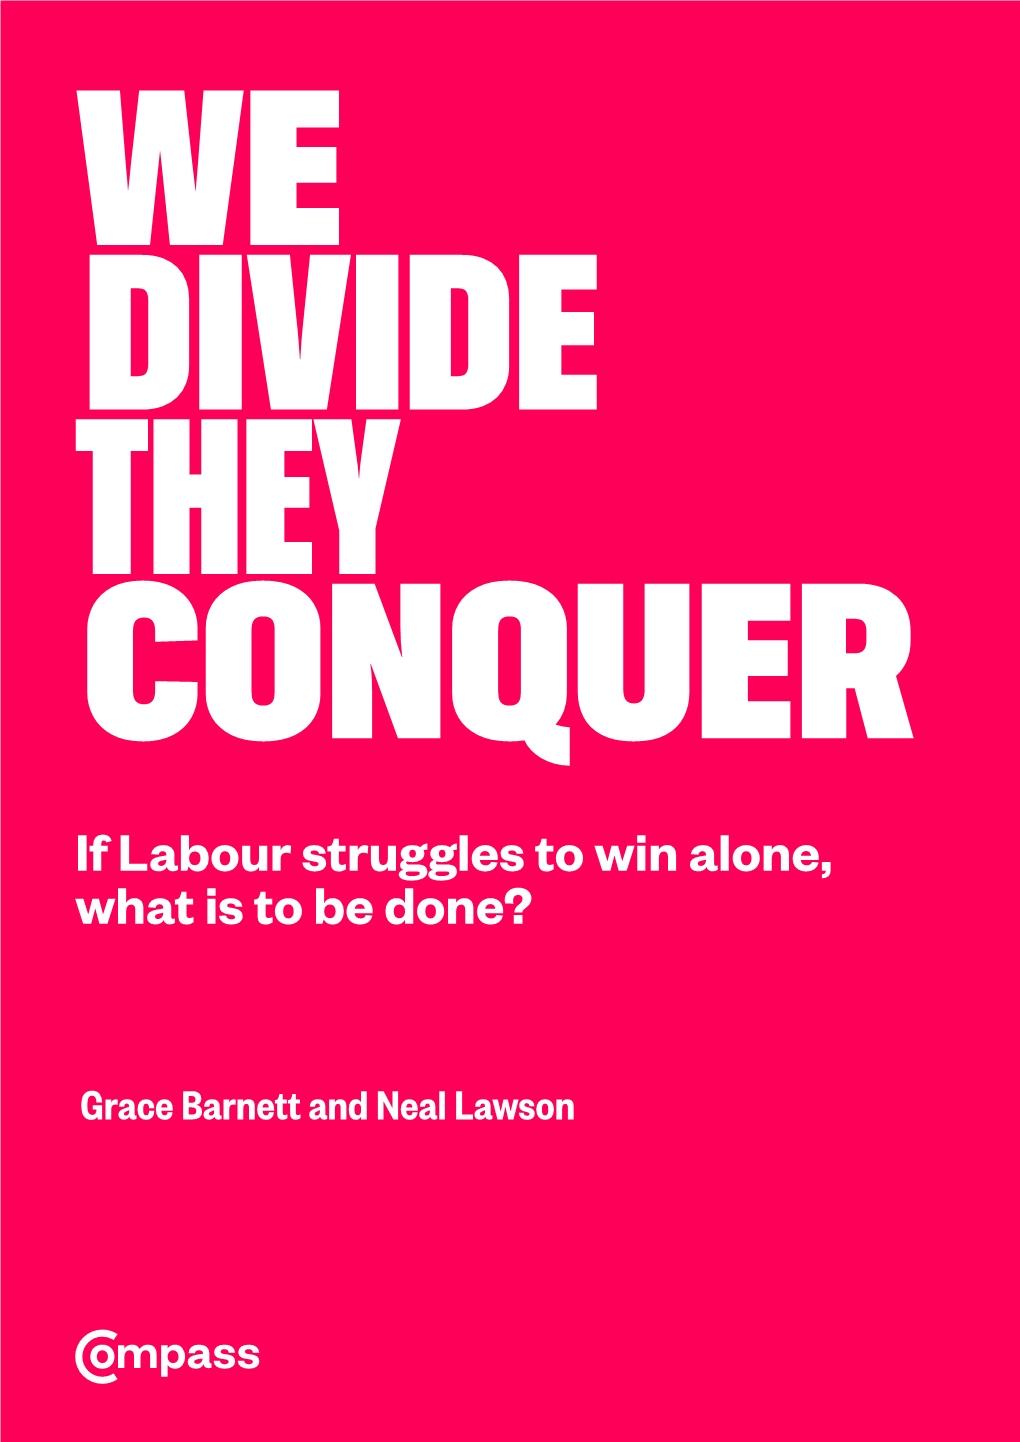 We Divide, They Conquer Please Get in Touch, Join, Support and Work with Us